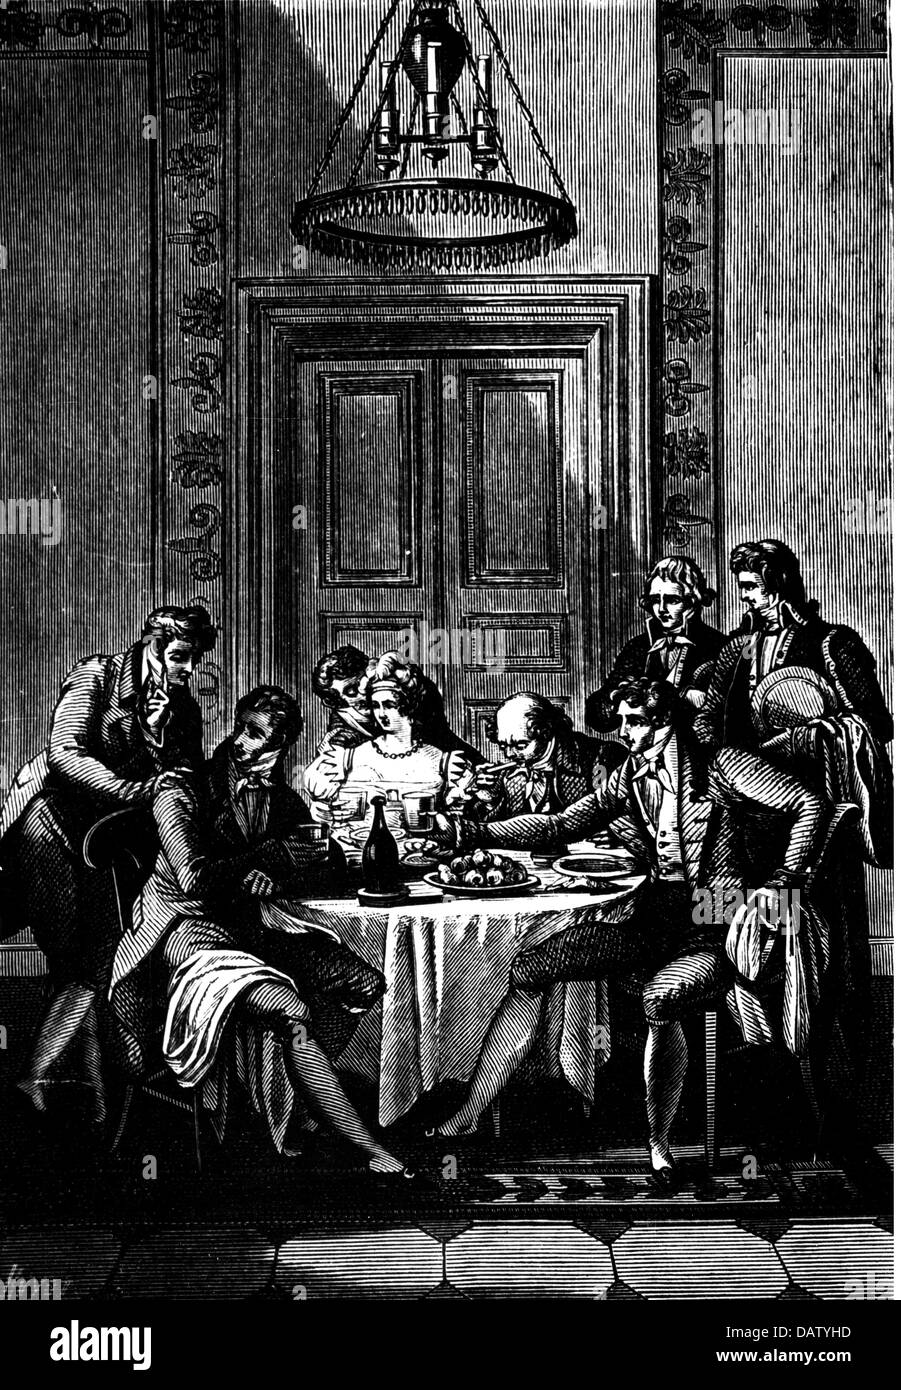 gastronomy, meals, round table, copper engraving, for the poem 'The Conversation', by Jacques Delille (1738 - 1813), 1812, Artist's Copyright has not to be cleared Stock Photo